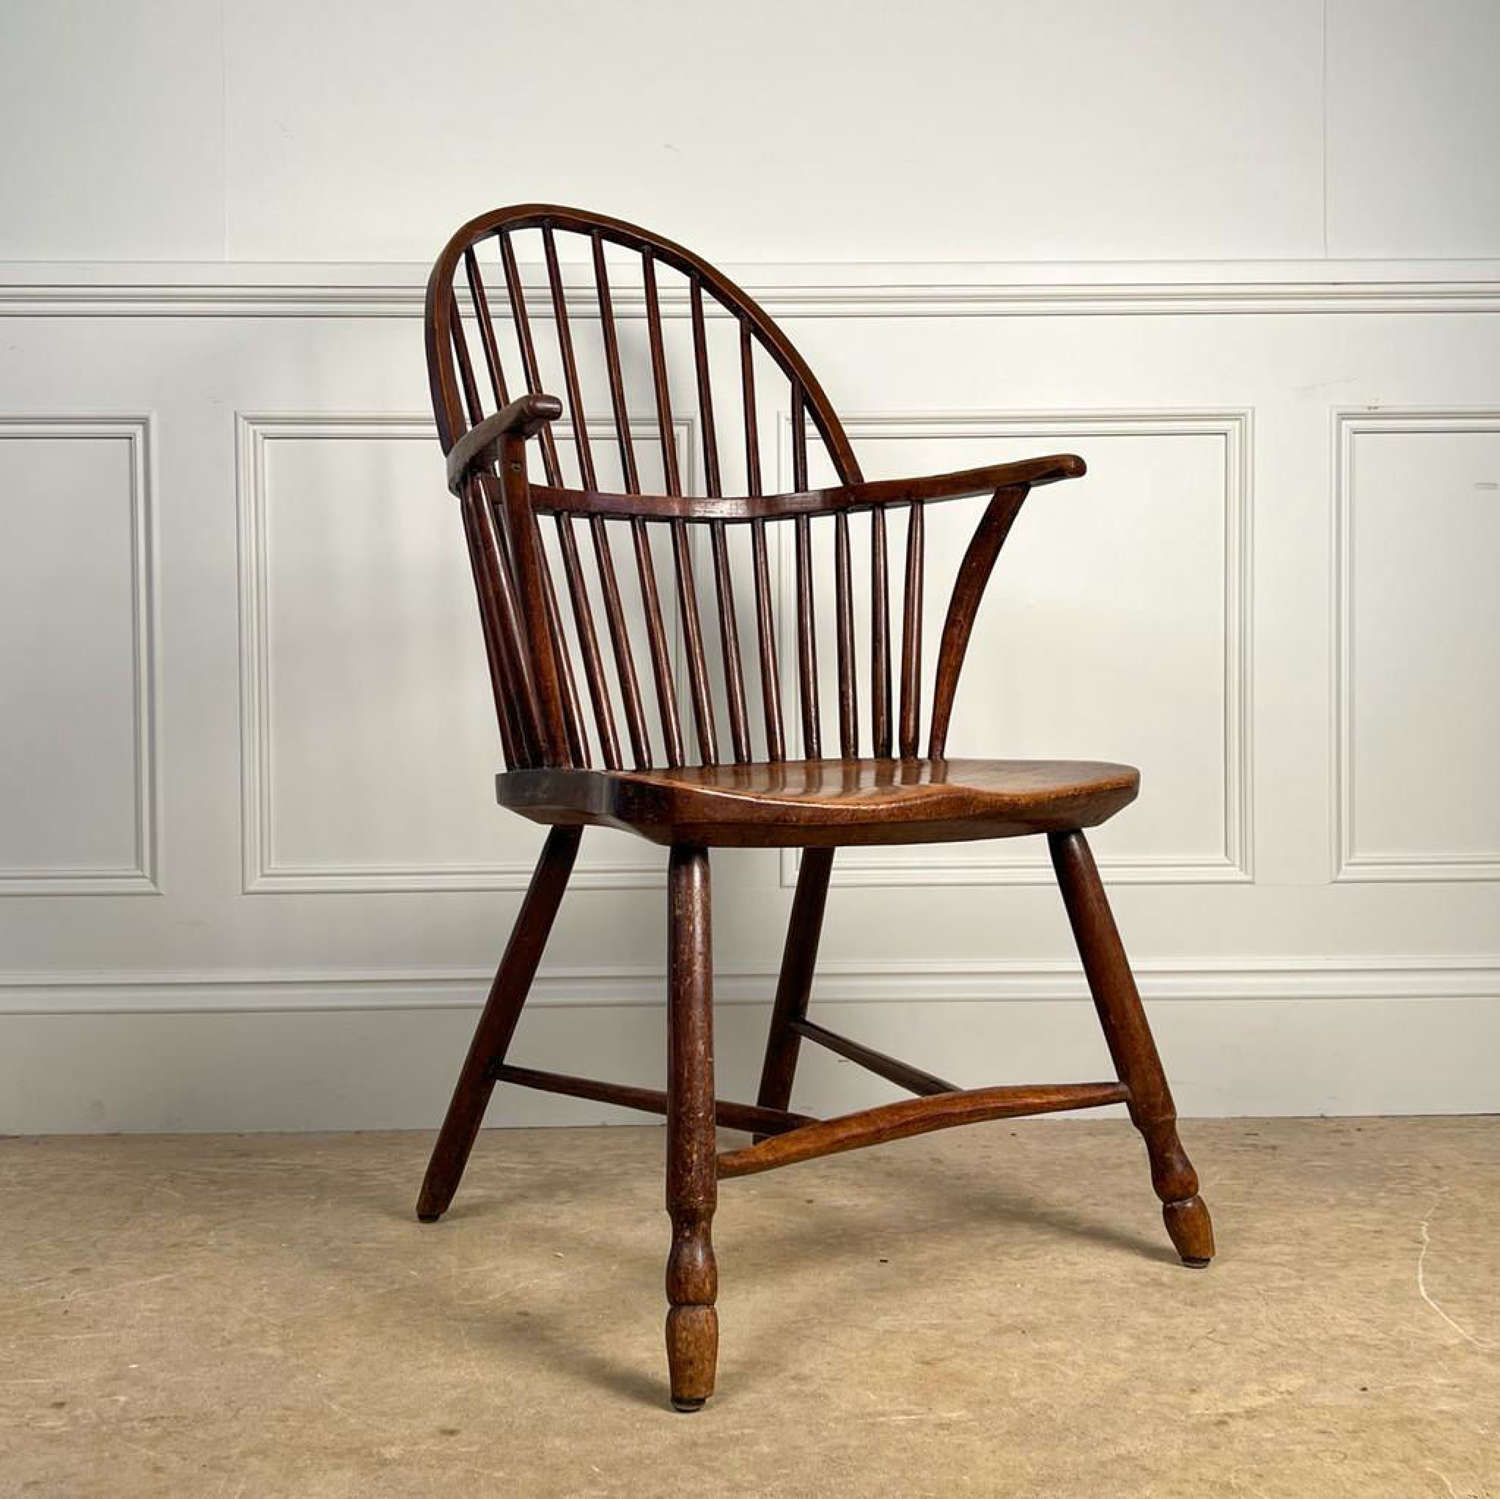 Rare Early 19th C Gillows Windsor Chair